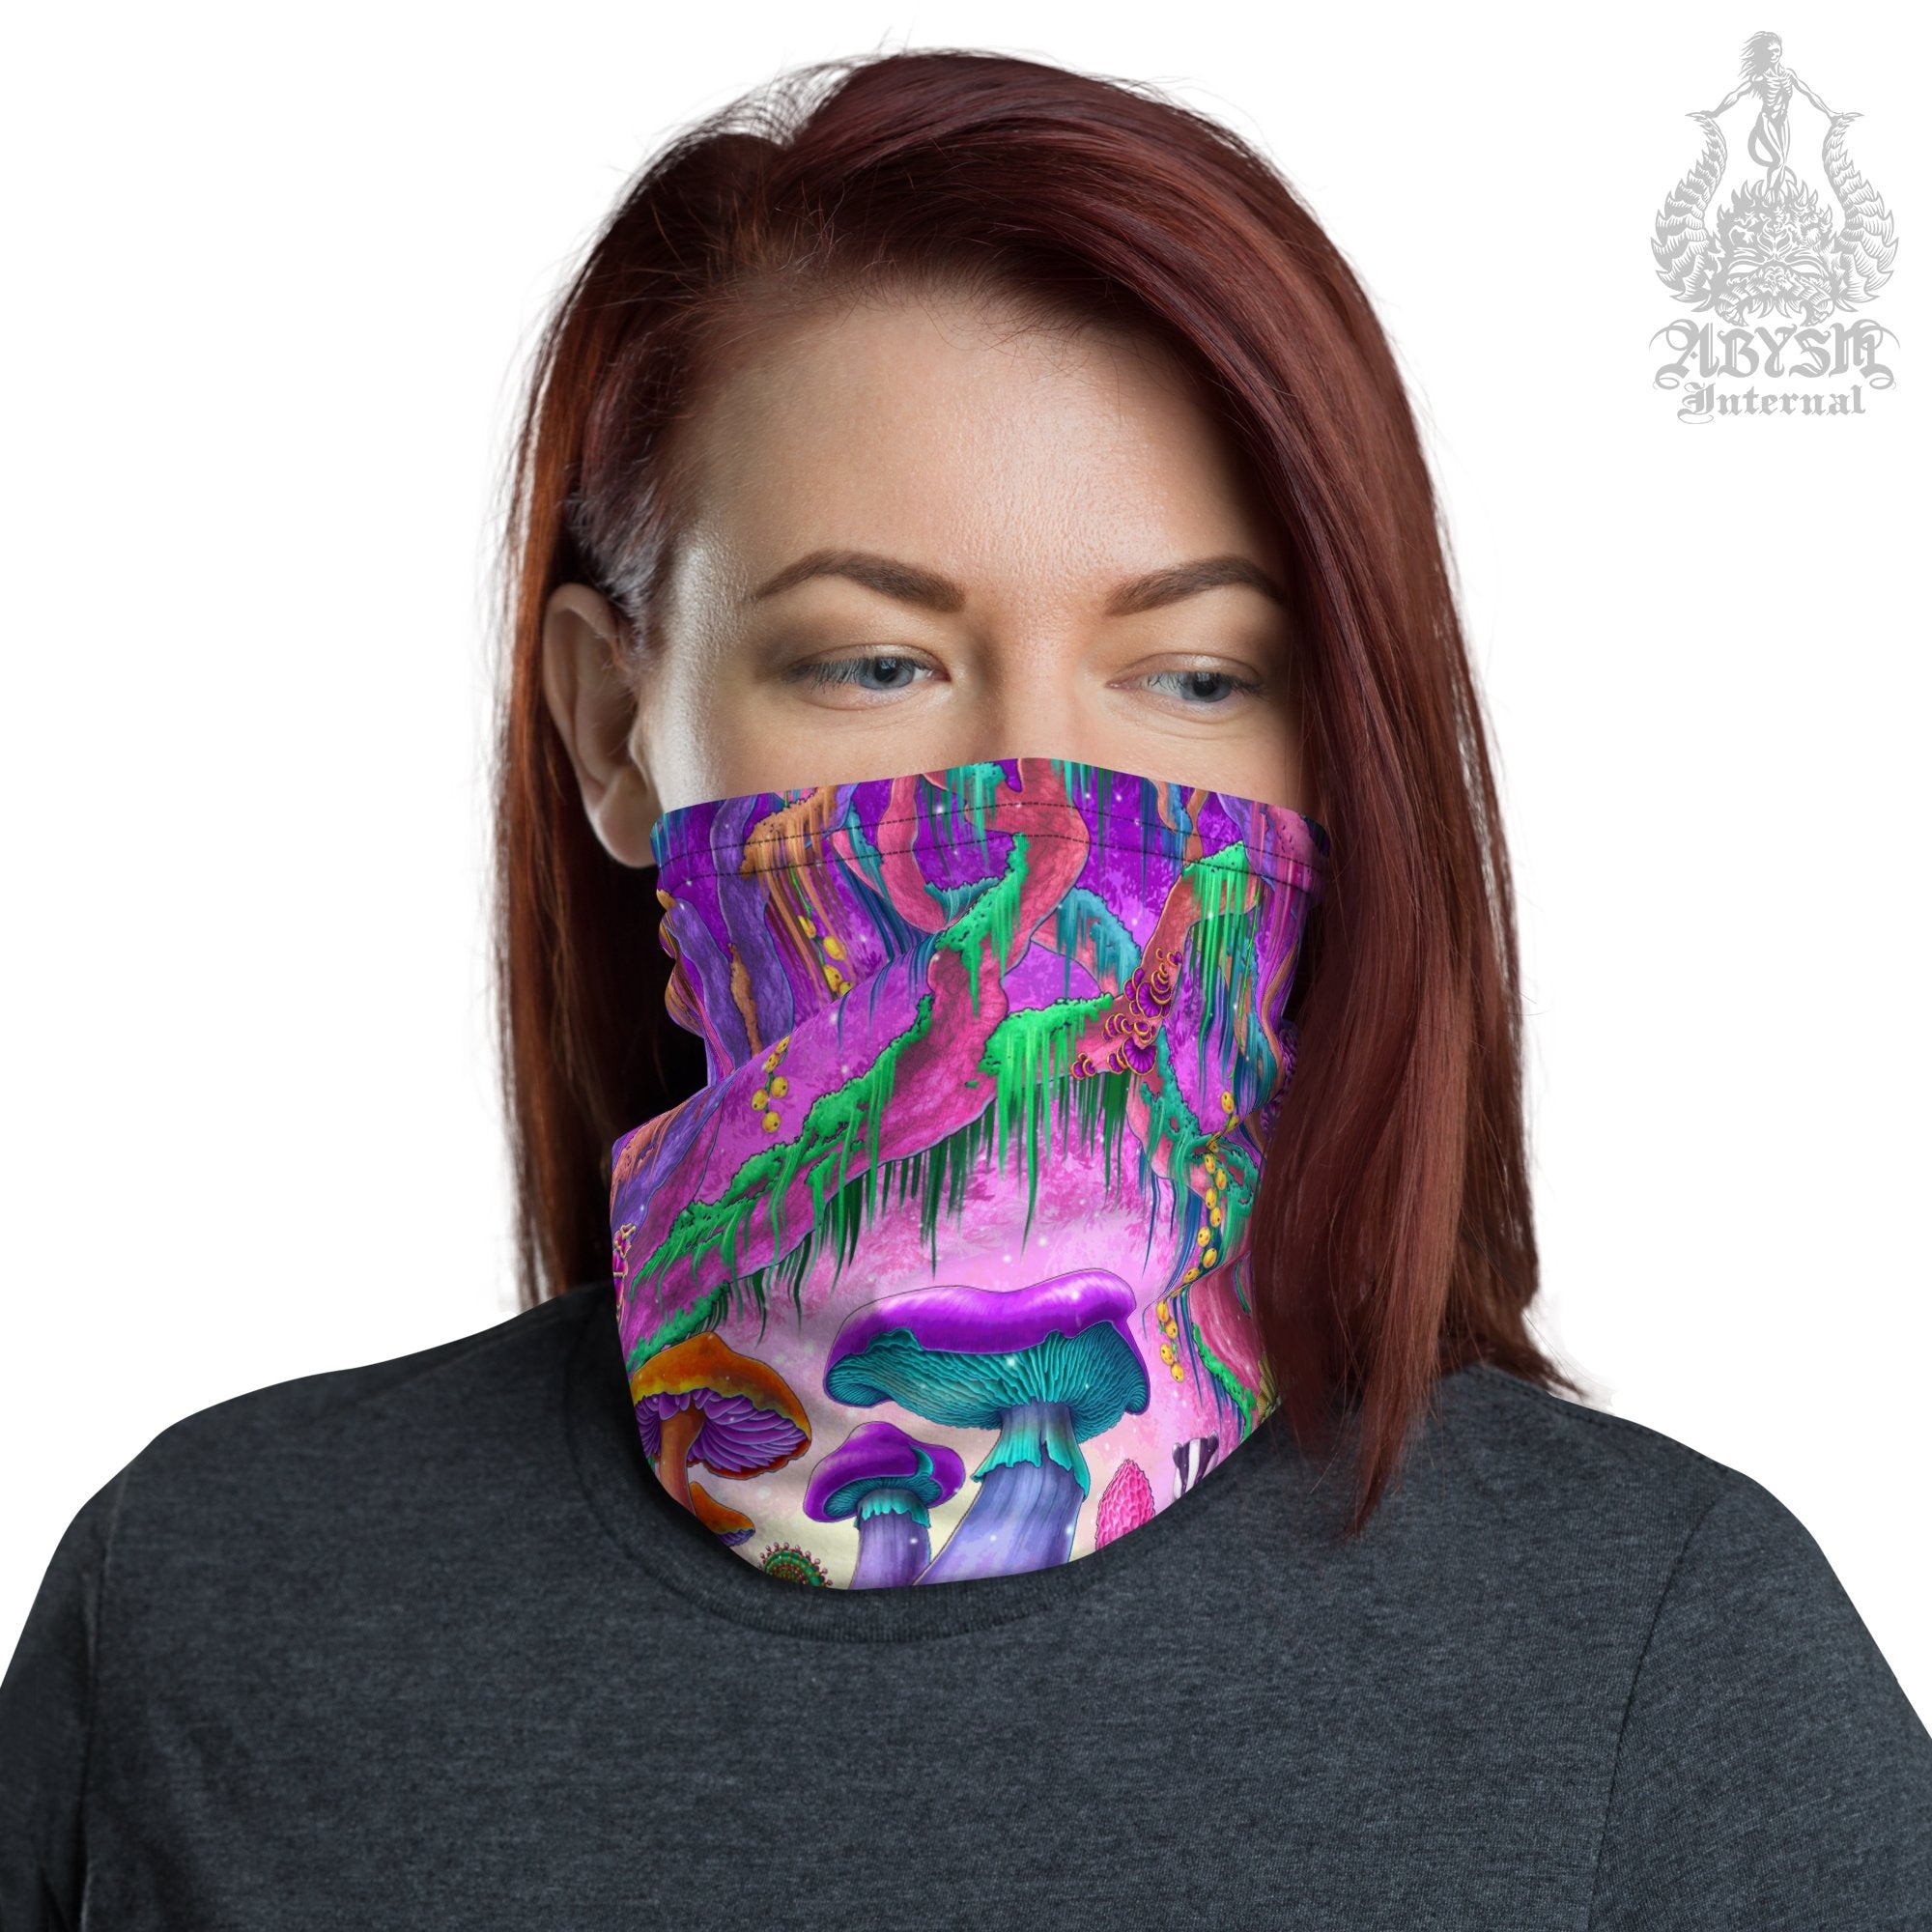 Psychedelic Mushrooms Neck Gaiter, Magic Shrooms Face Mask, Pastel Head Covering, Aesthetic Festival Outfit - Abysm Internal